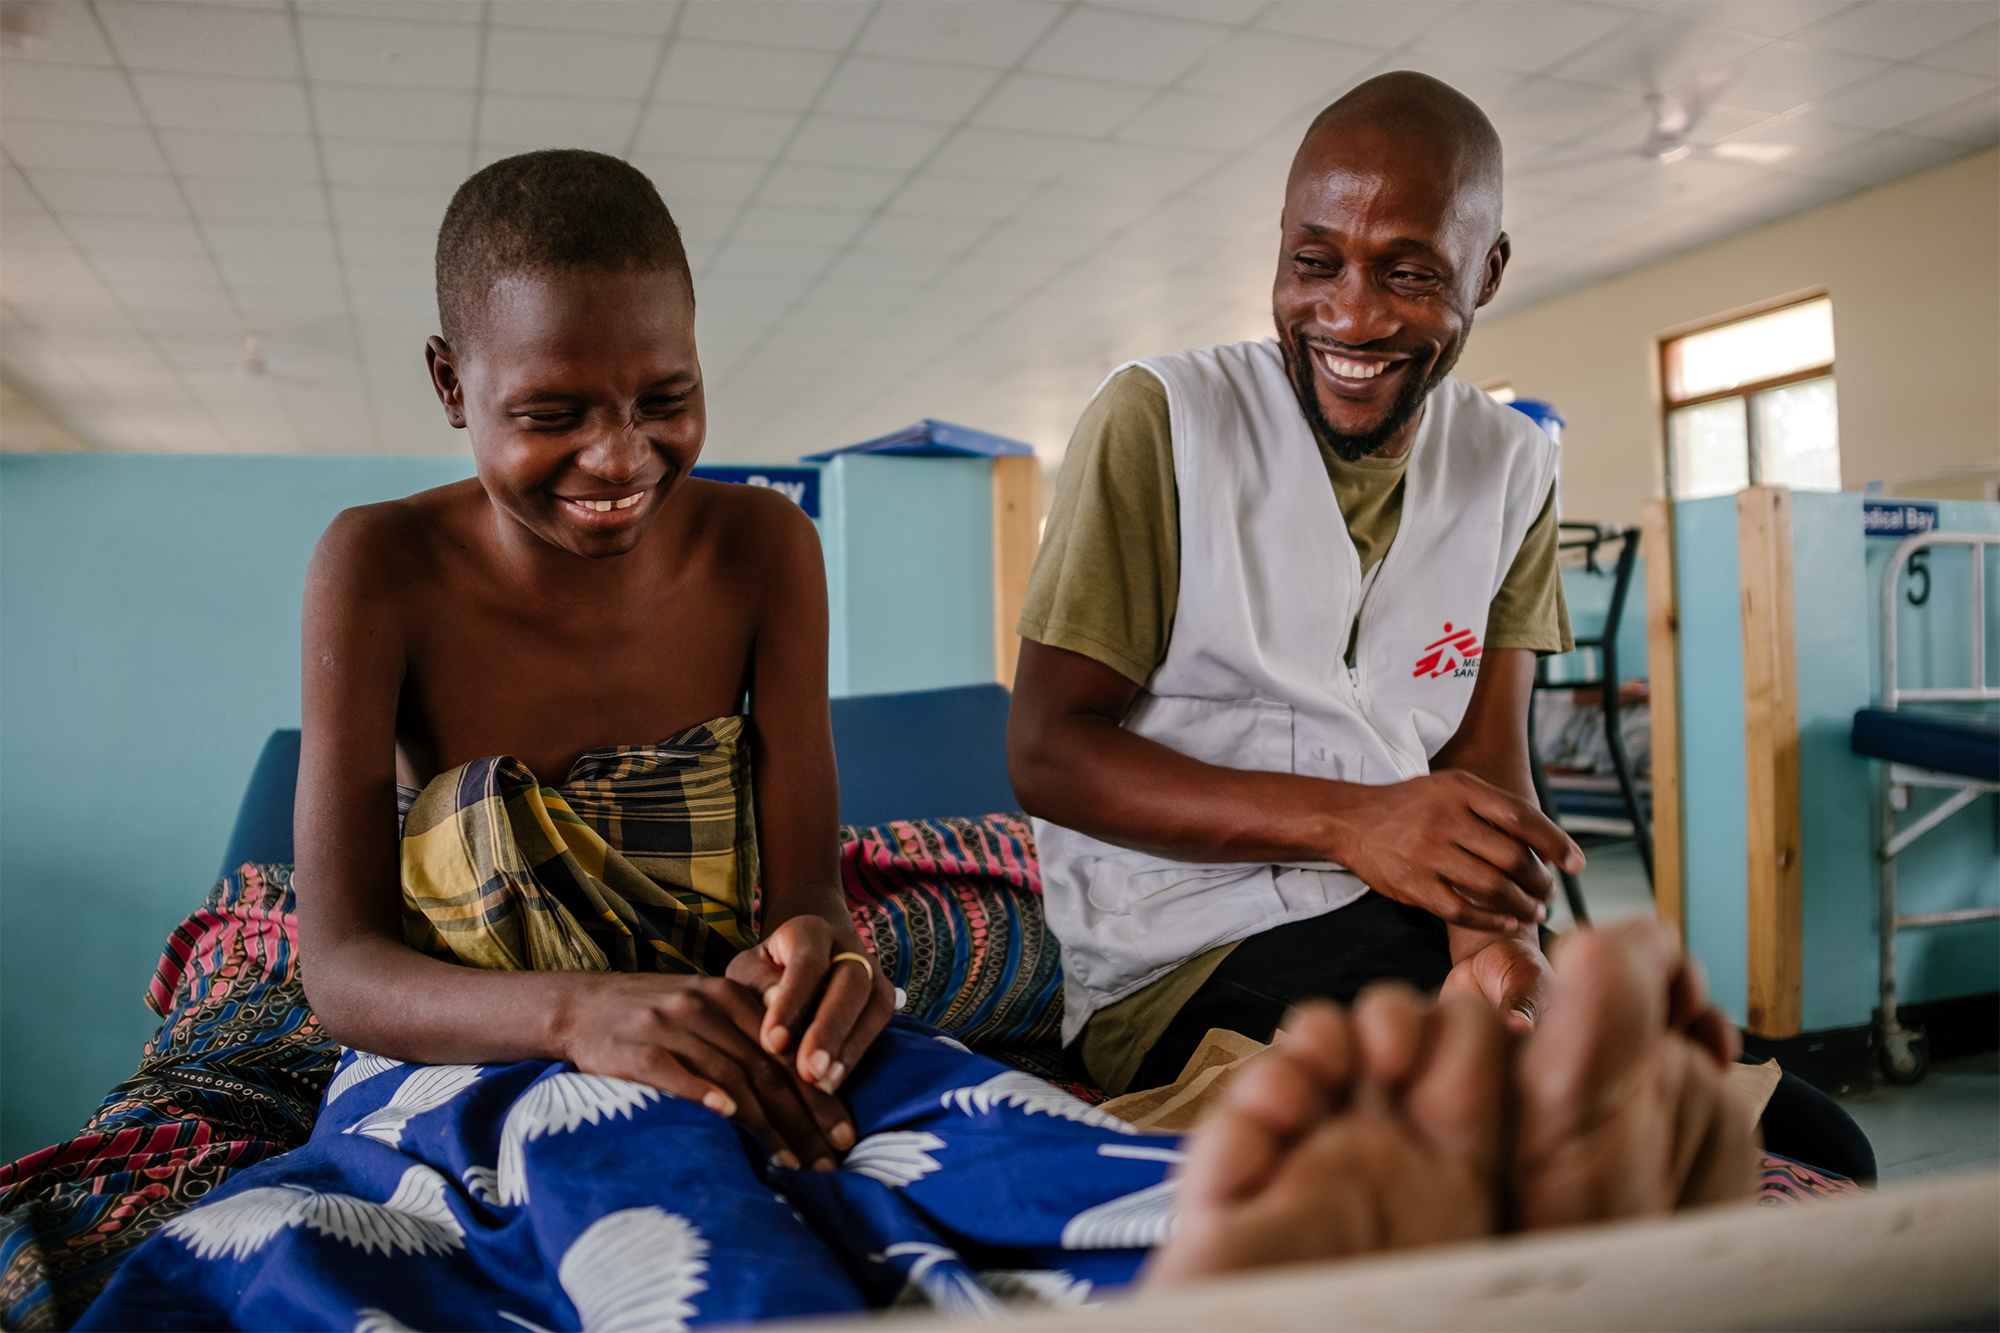 Esther, an advanced HIV patient interacting with Moses Luhanga, MSF Information Education and Communication Manager. In the picture, Moses is finding out how Esther is feeling. © Isabel Corthier/MSF